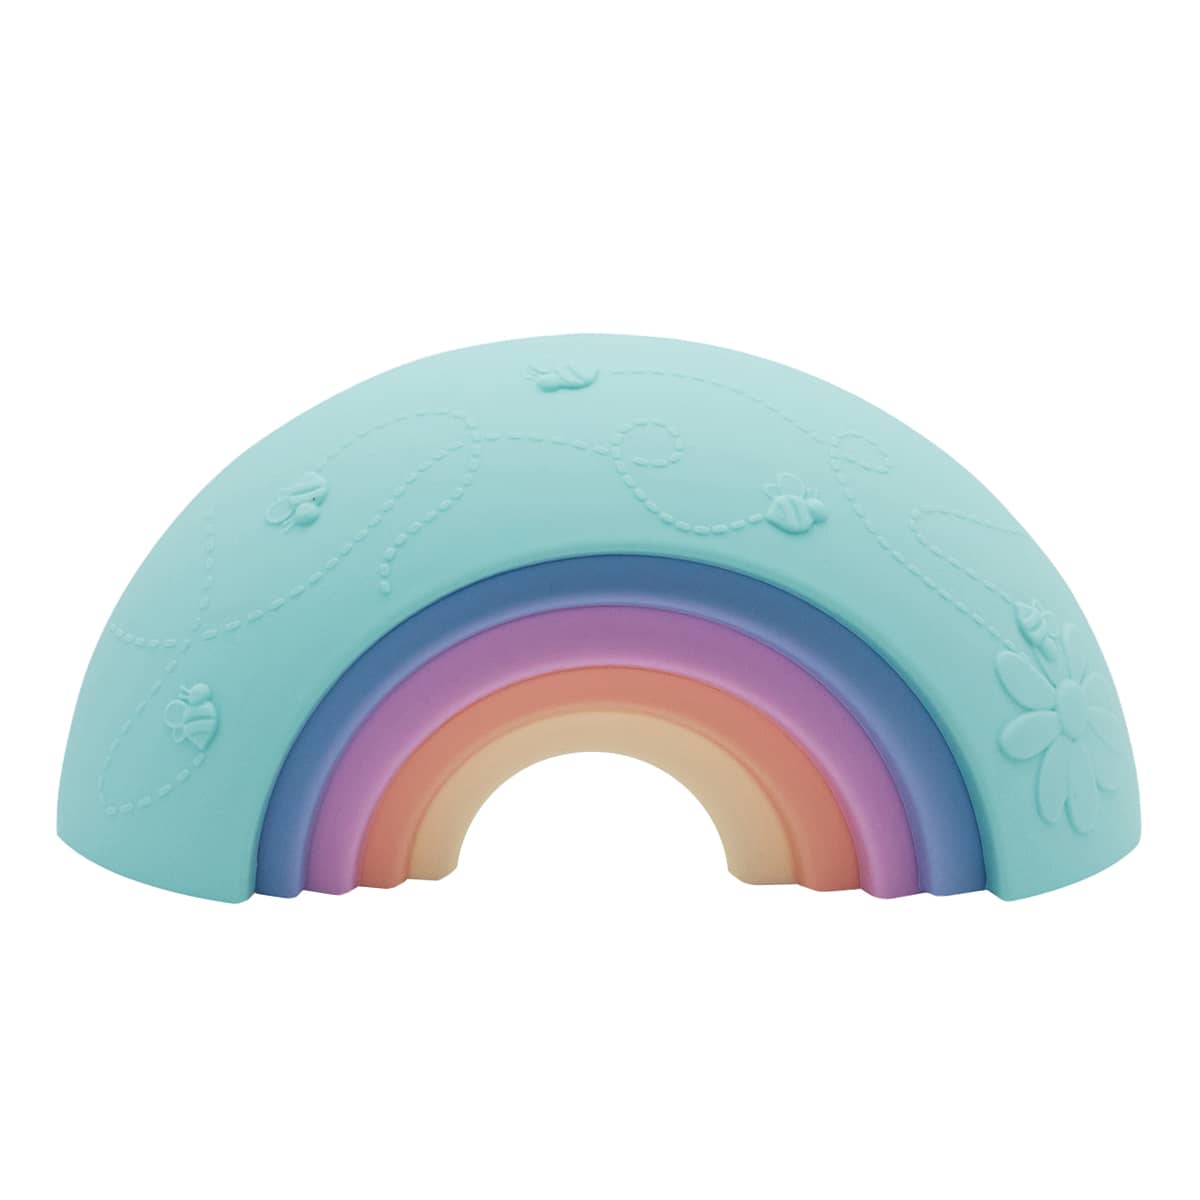 Jellystone Designs Over the Rainbow Silicone Arches - Pastel